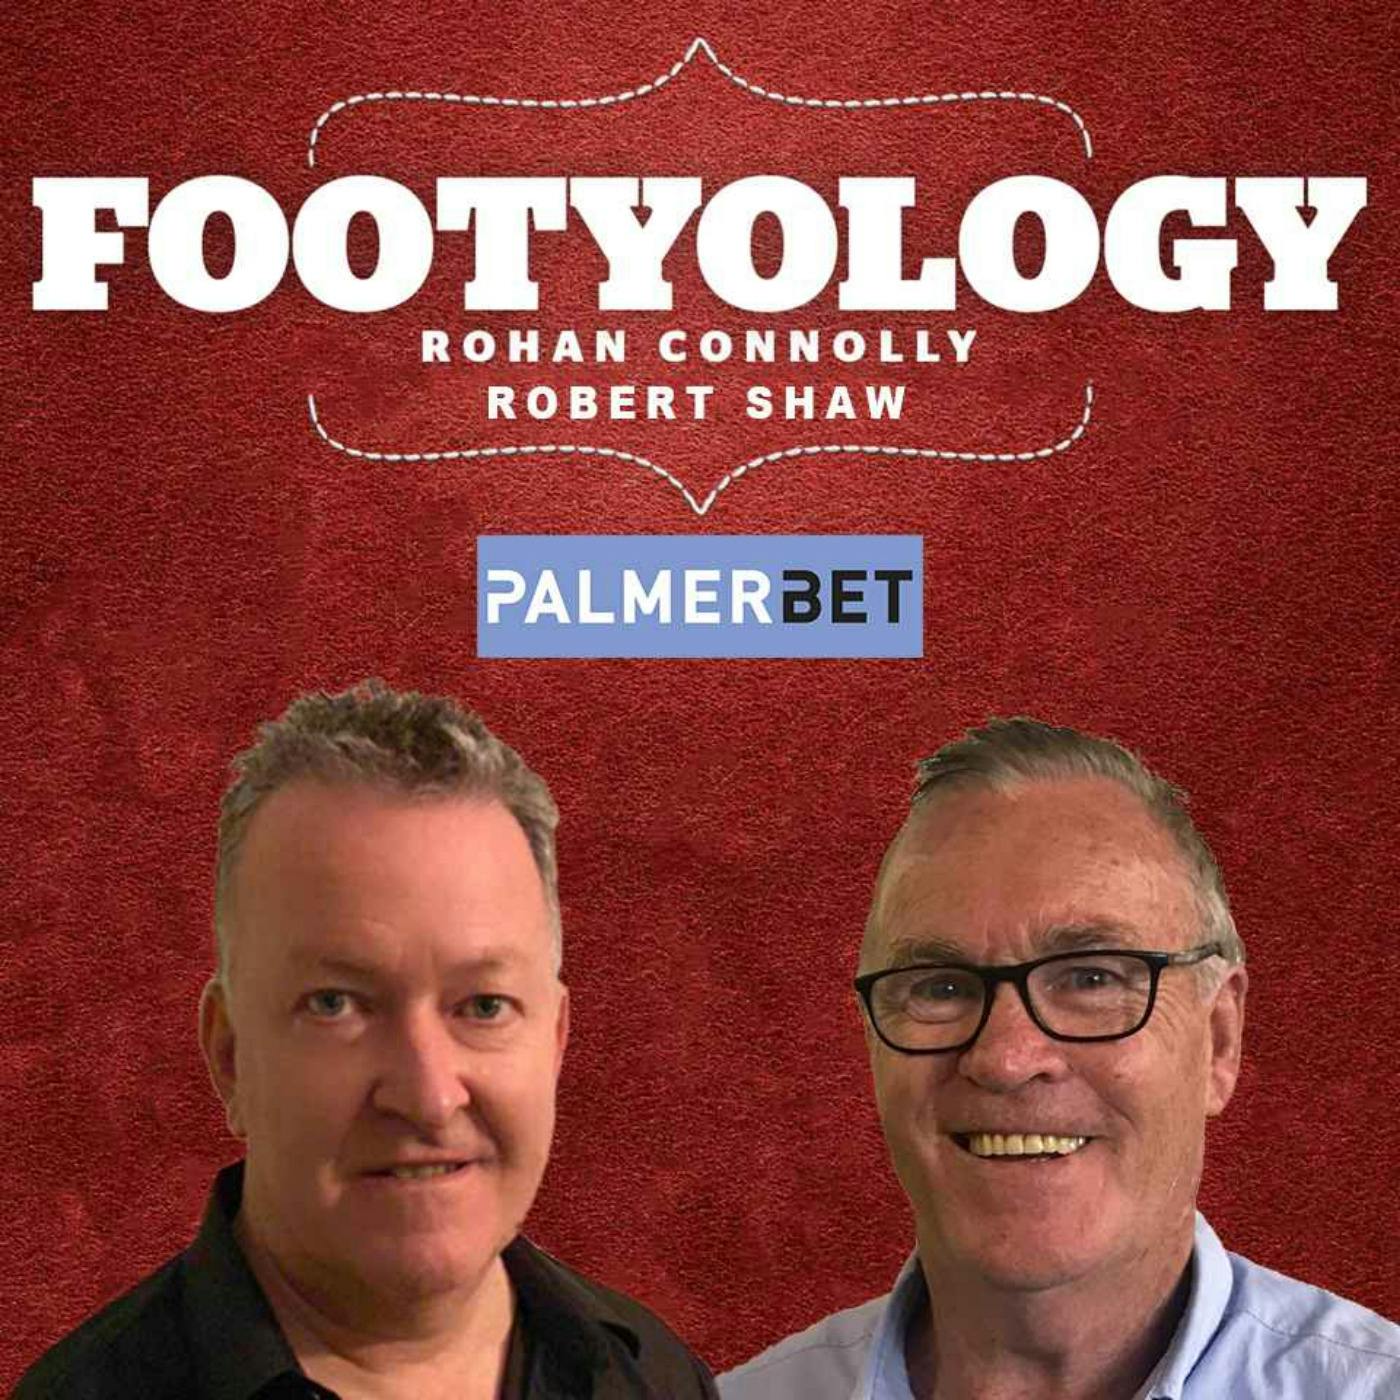 Footyology Podcast - July 3rd 2022